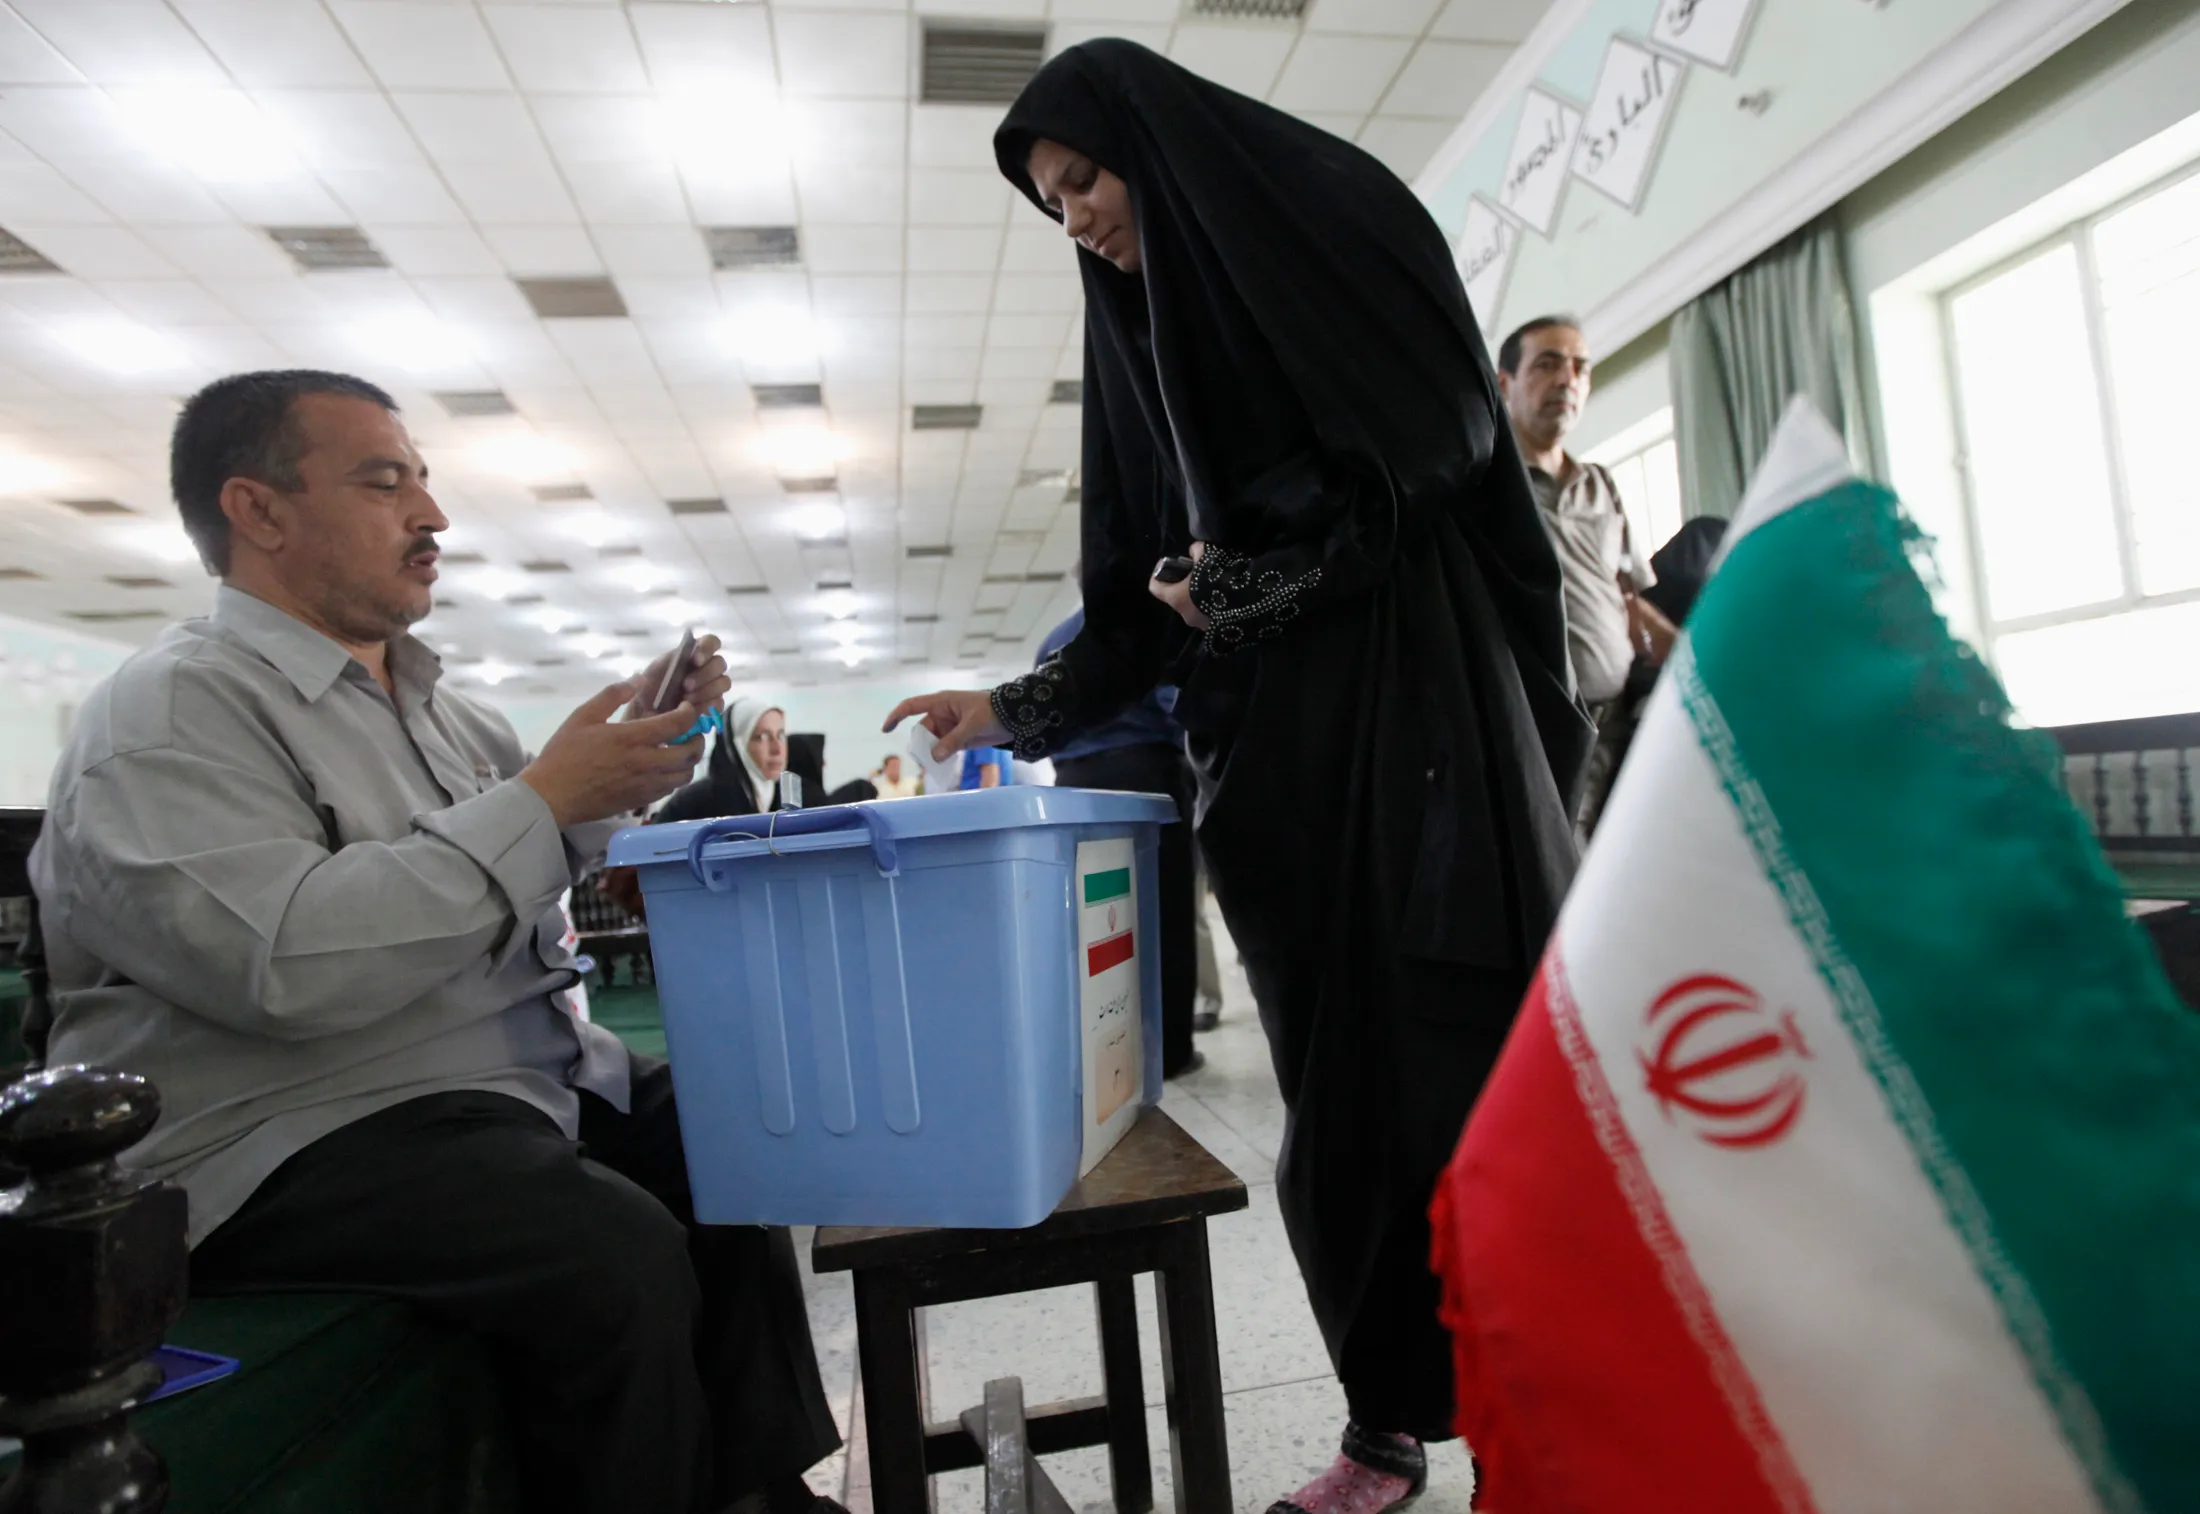 Canada prohibits Iranian polling stations in the country